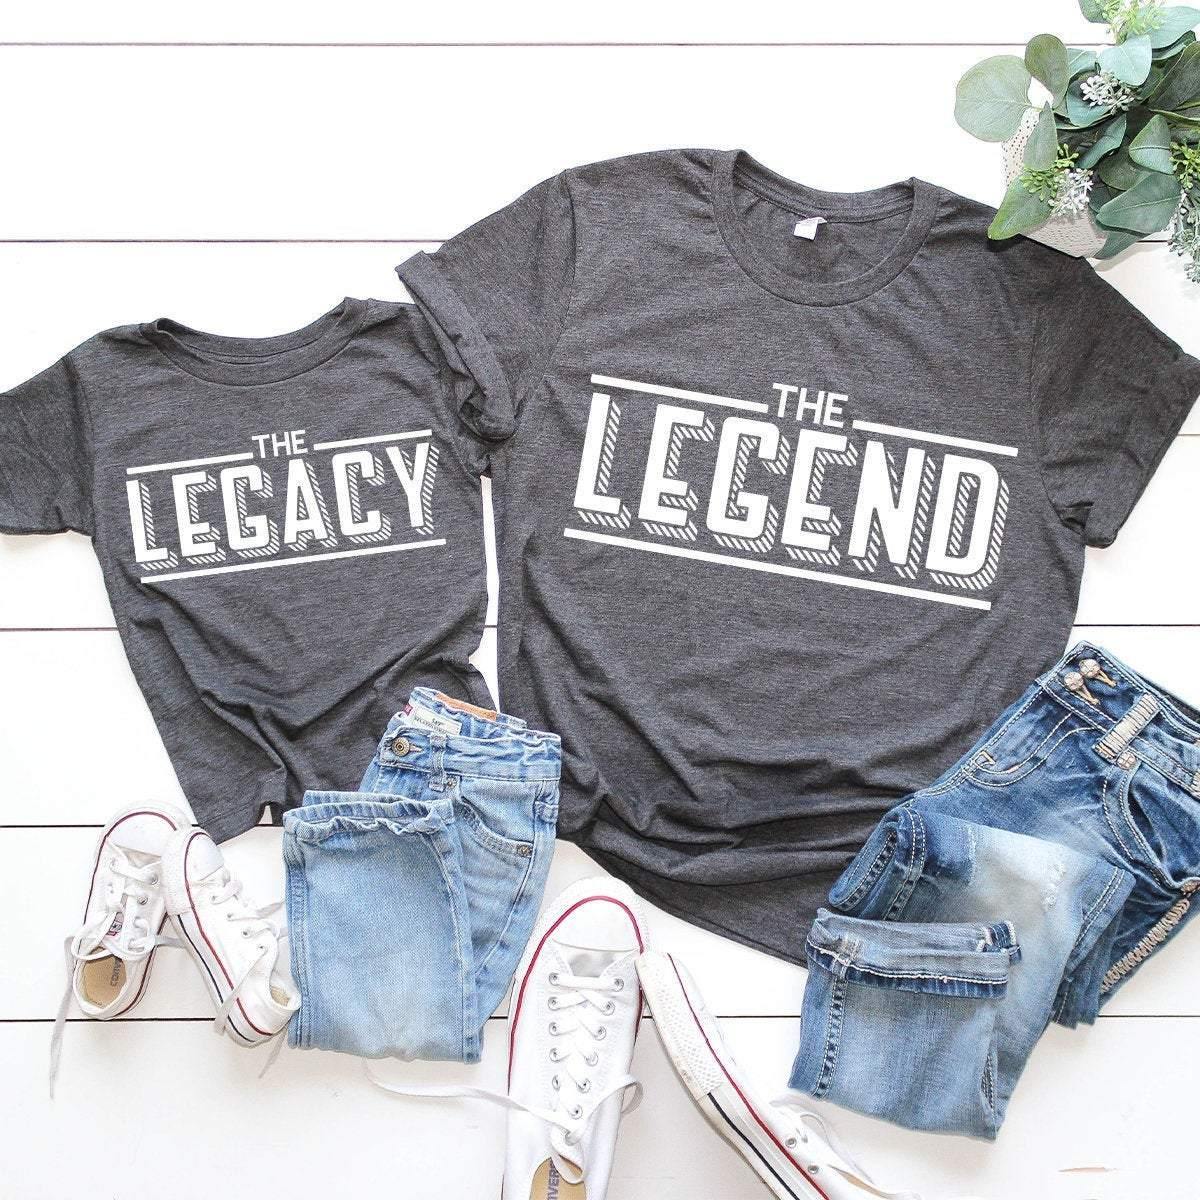 Dad And Son Matching Shirt, Daddy And Son Shirt, Legend Legacy Shirt, Funny Family Shirt, Fathers Day Matching Shirt, Dad And Son T-Shirt - Fastdeliverytees.com